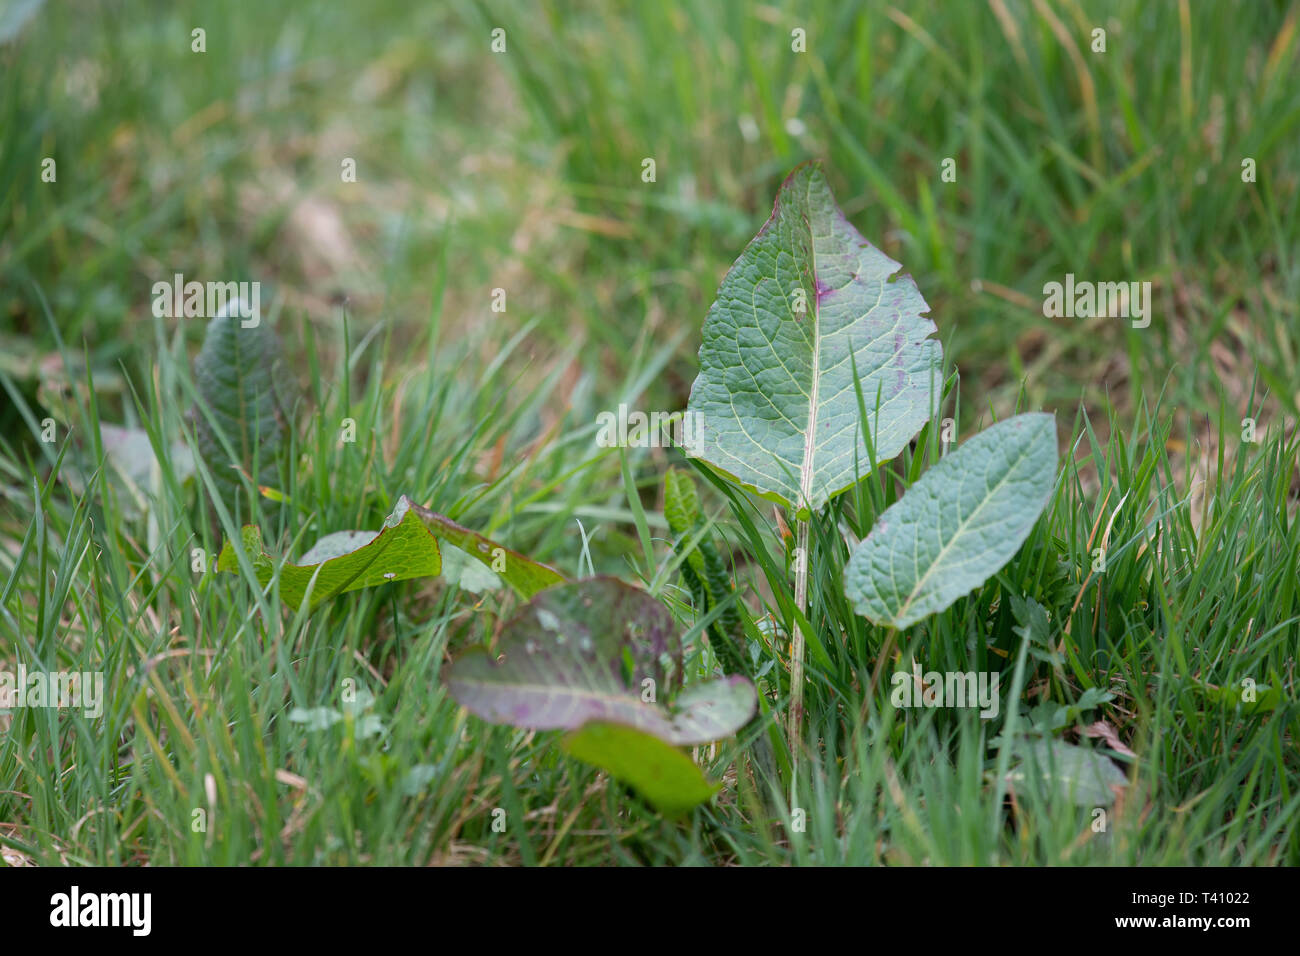 Weeds in grass land Stock Photo